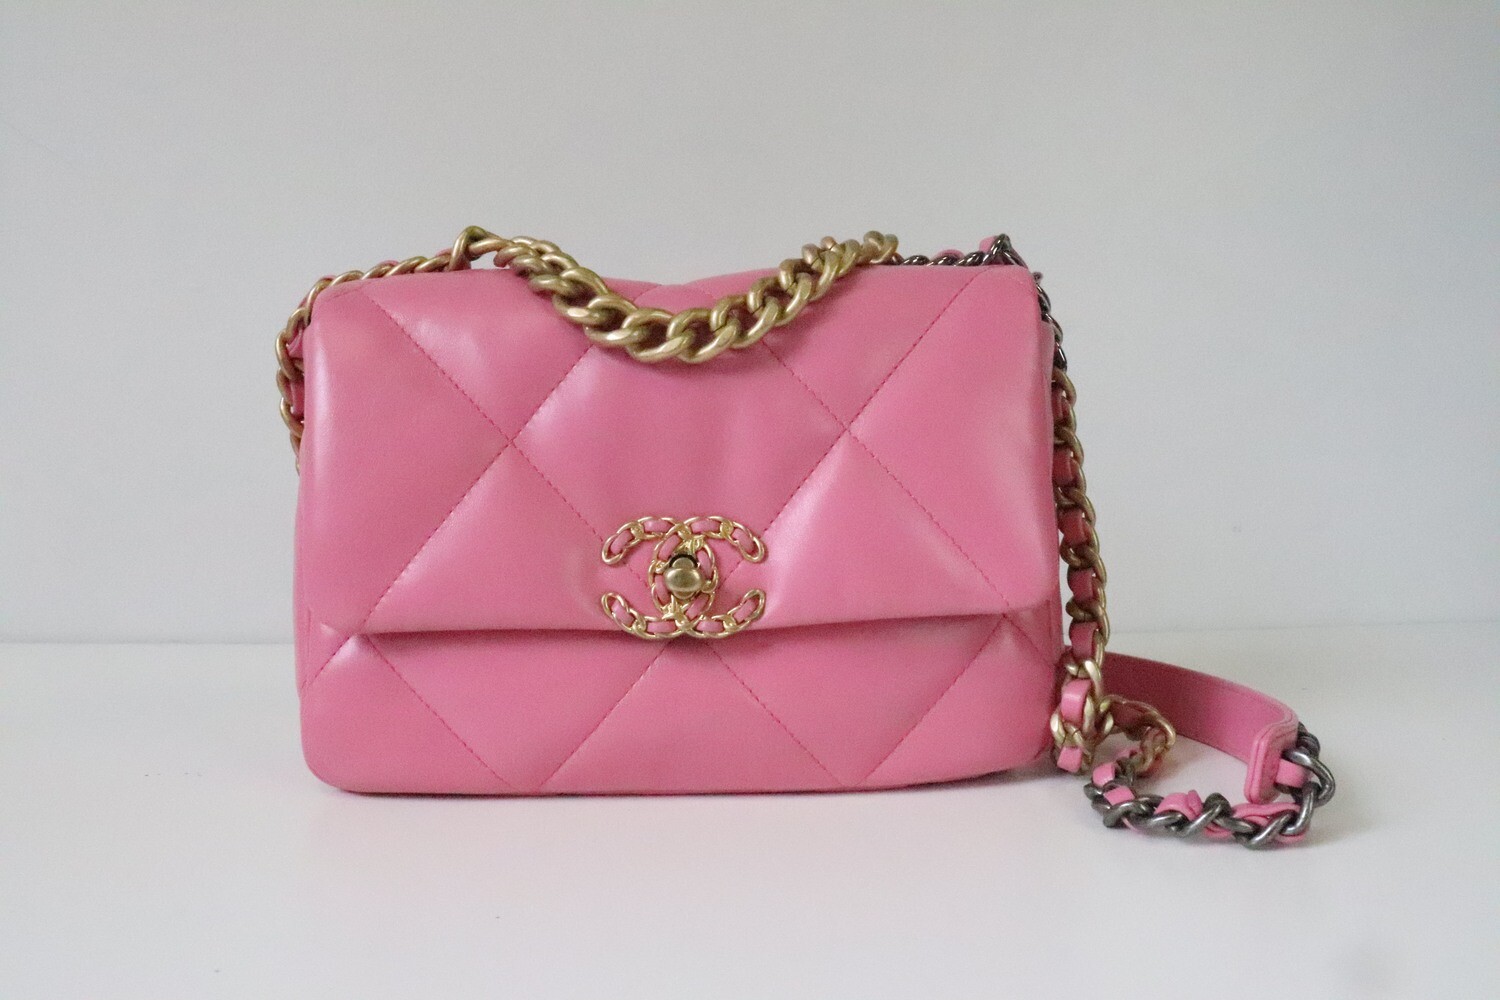 Chanel 19 Small, 21S Pink, New in Box